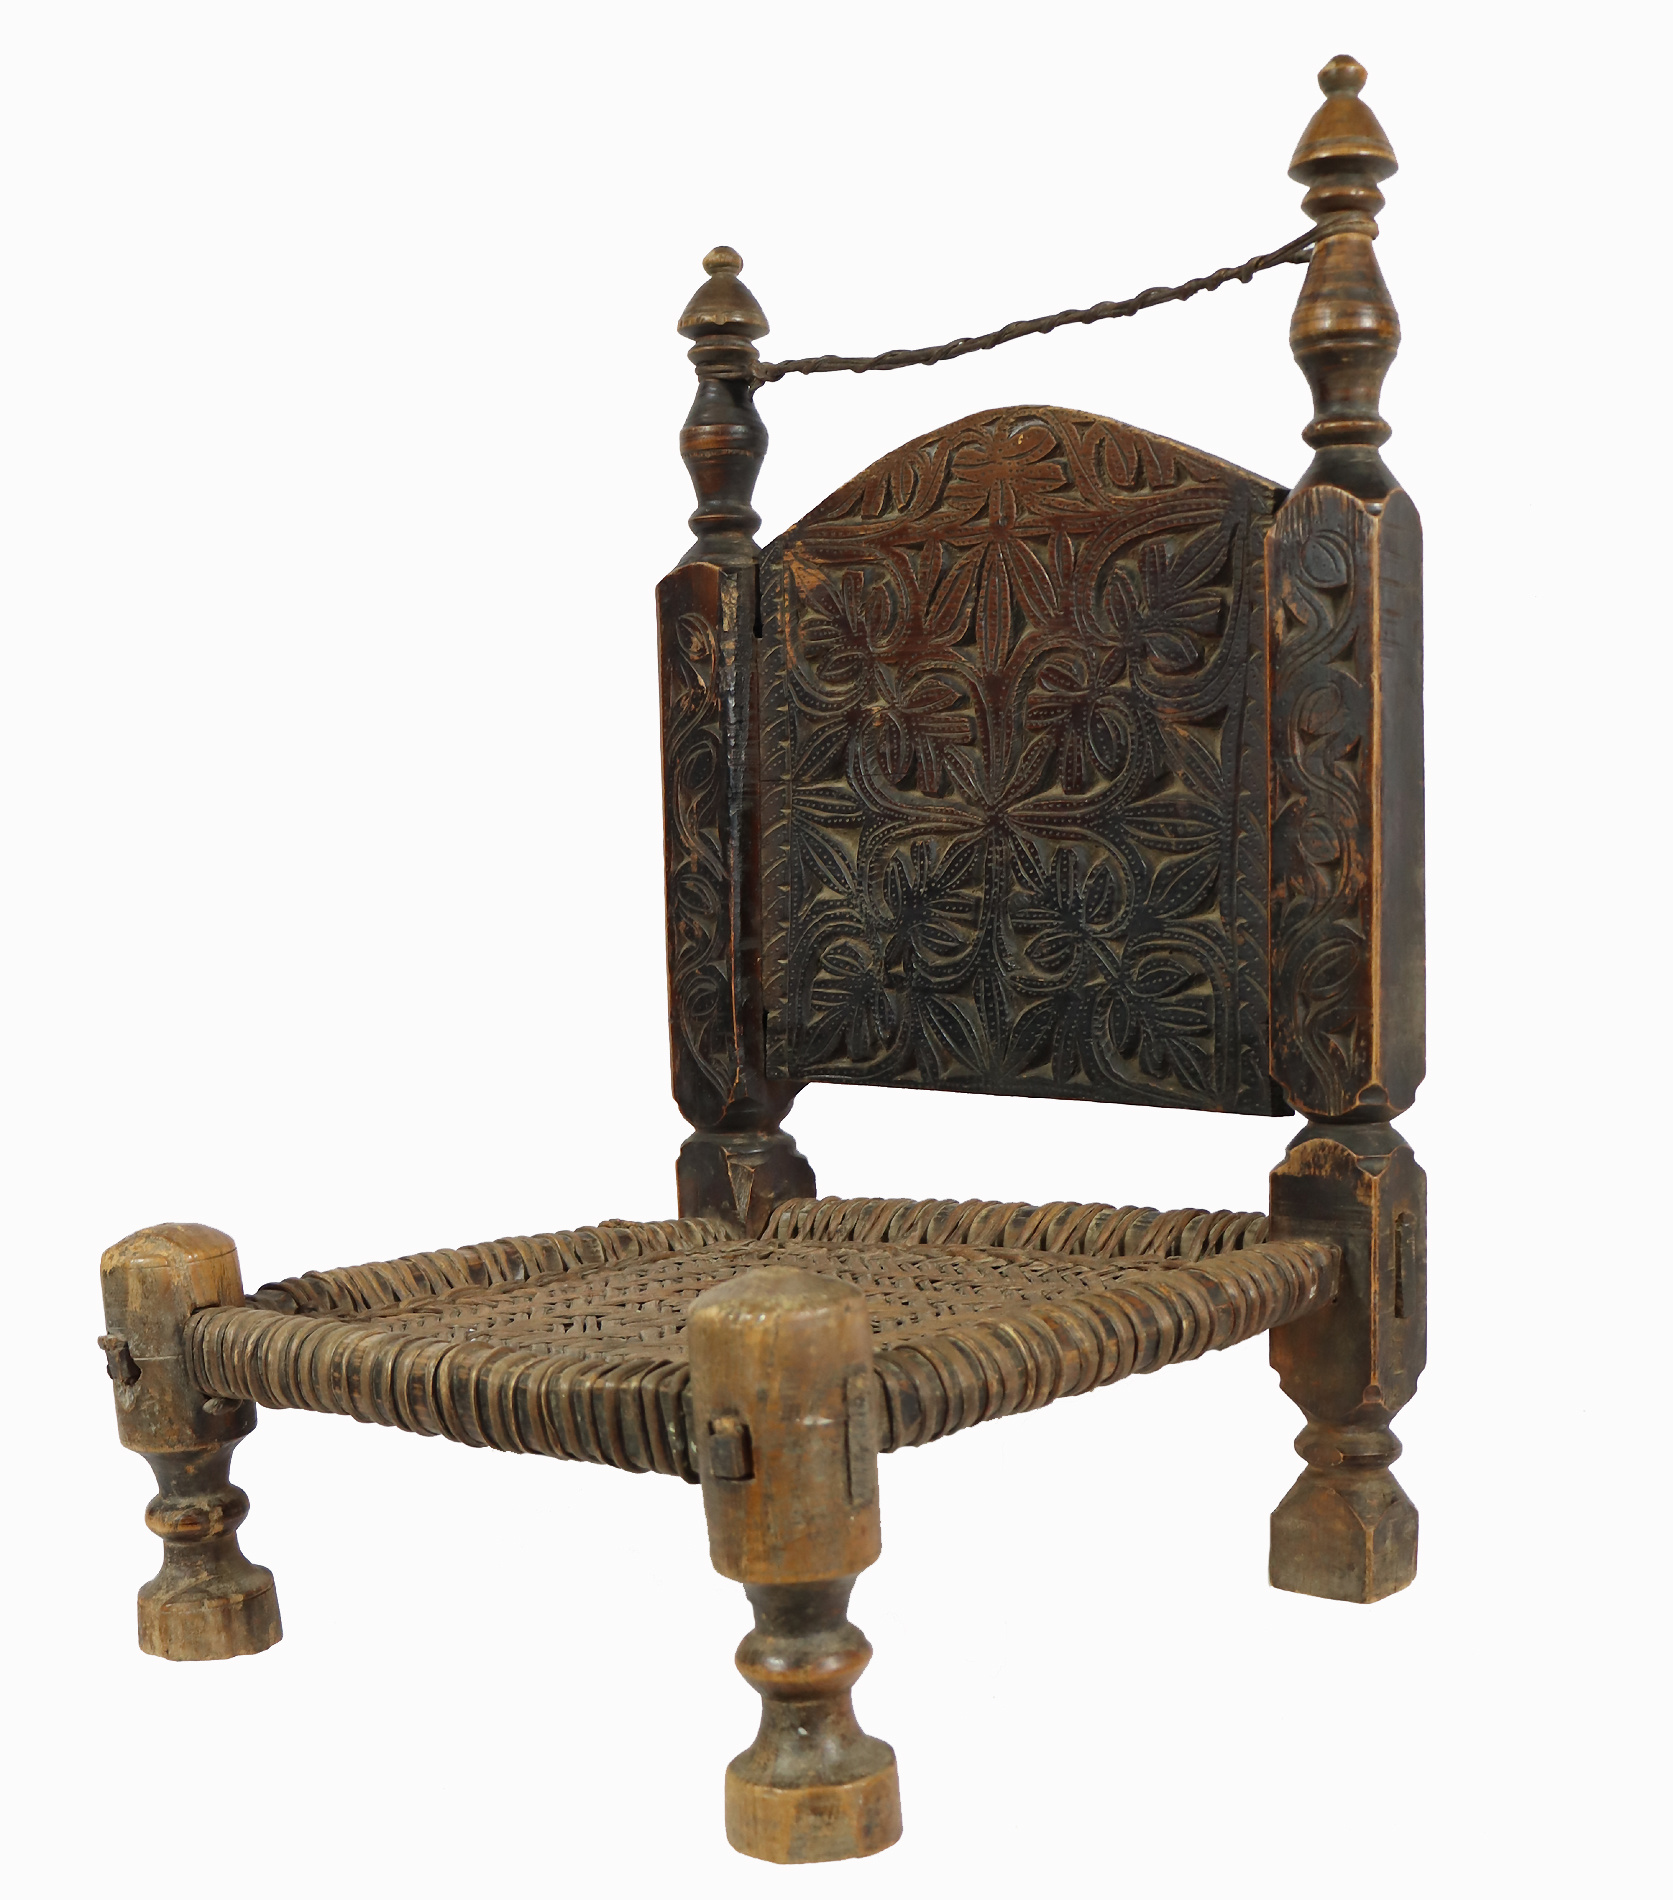 antiquity chair from Nuristan Afghanistan / Swat-valley Pakistan No: ULM-A